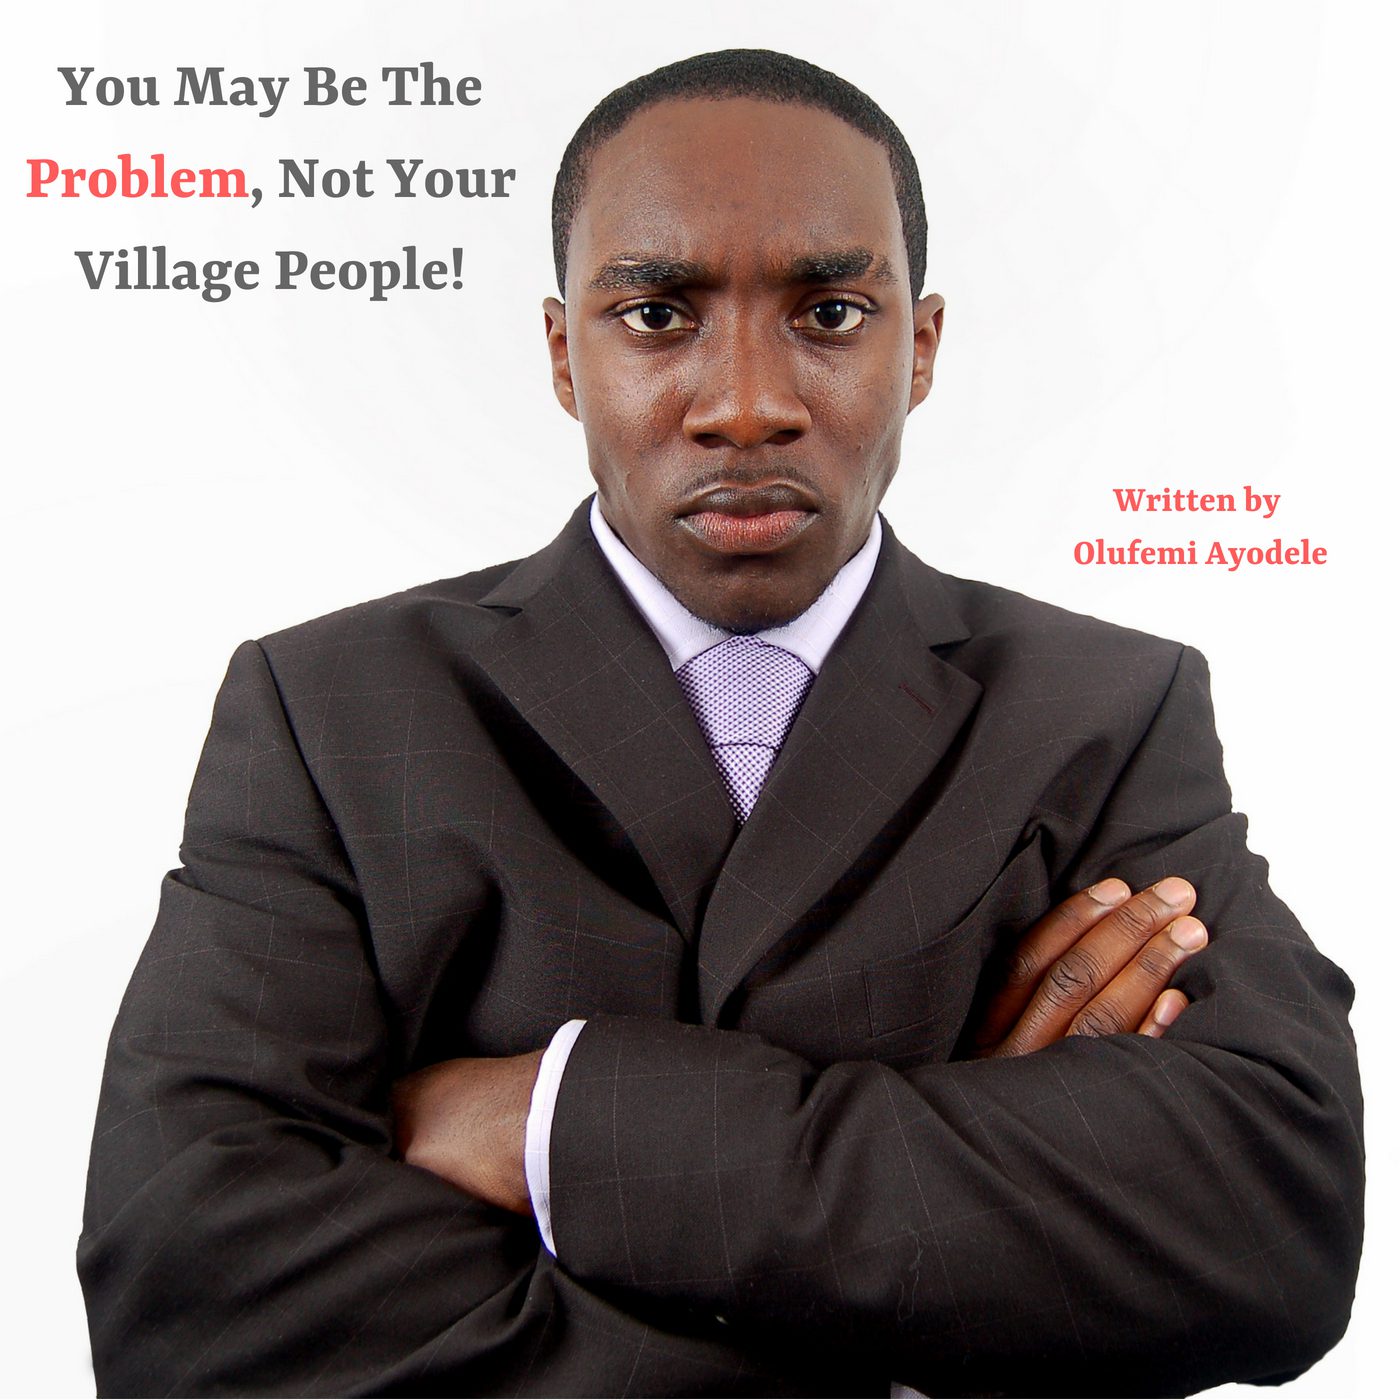 You may be the Problem, not your Village People